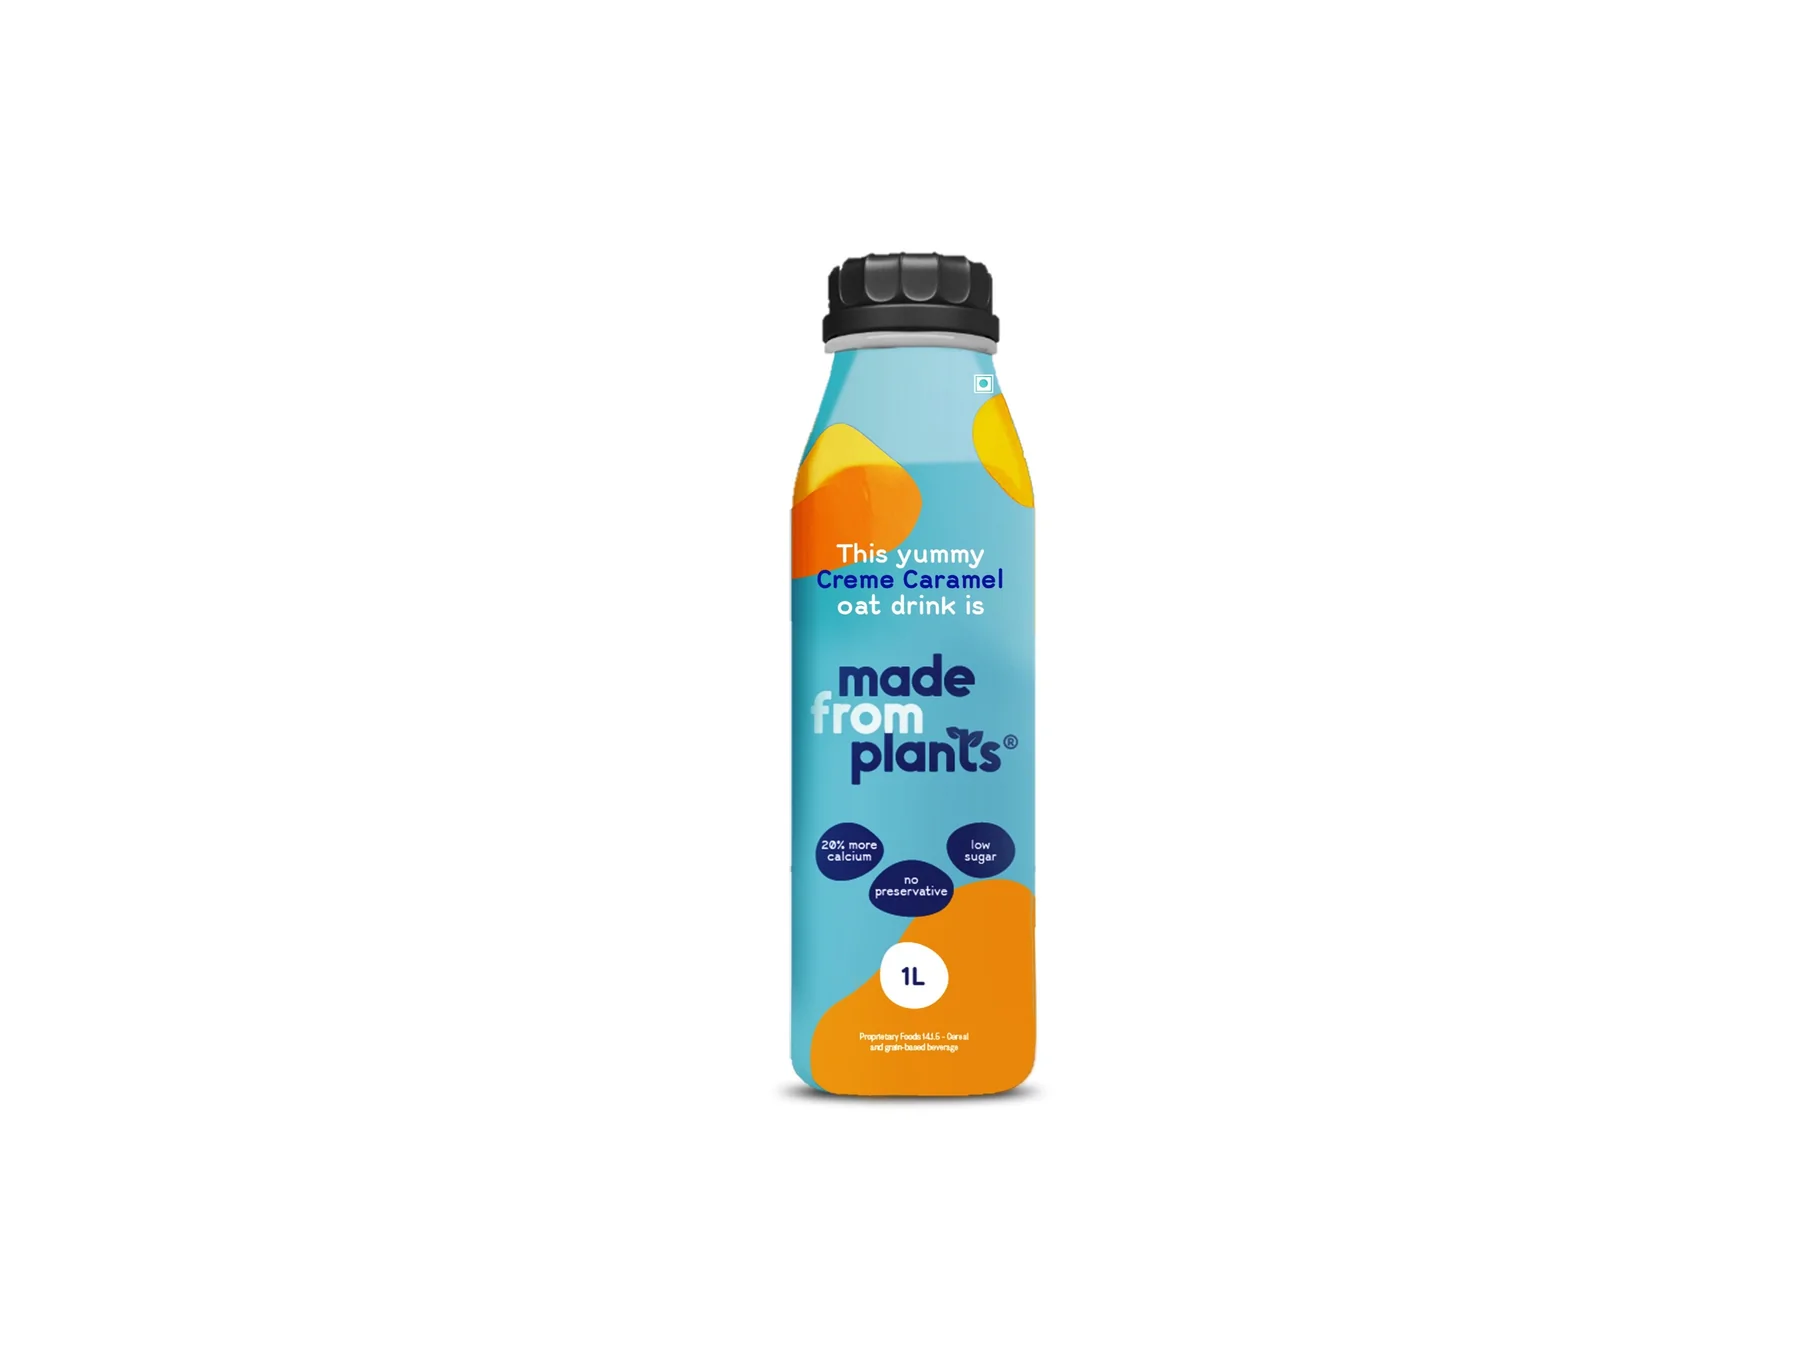 Made From Plants Creme Caramel Oat Drink  Image